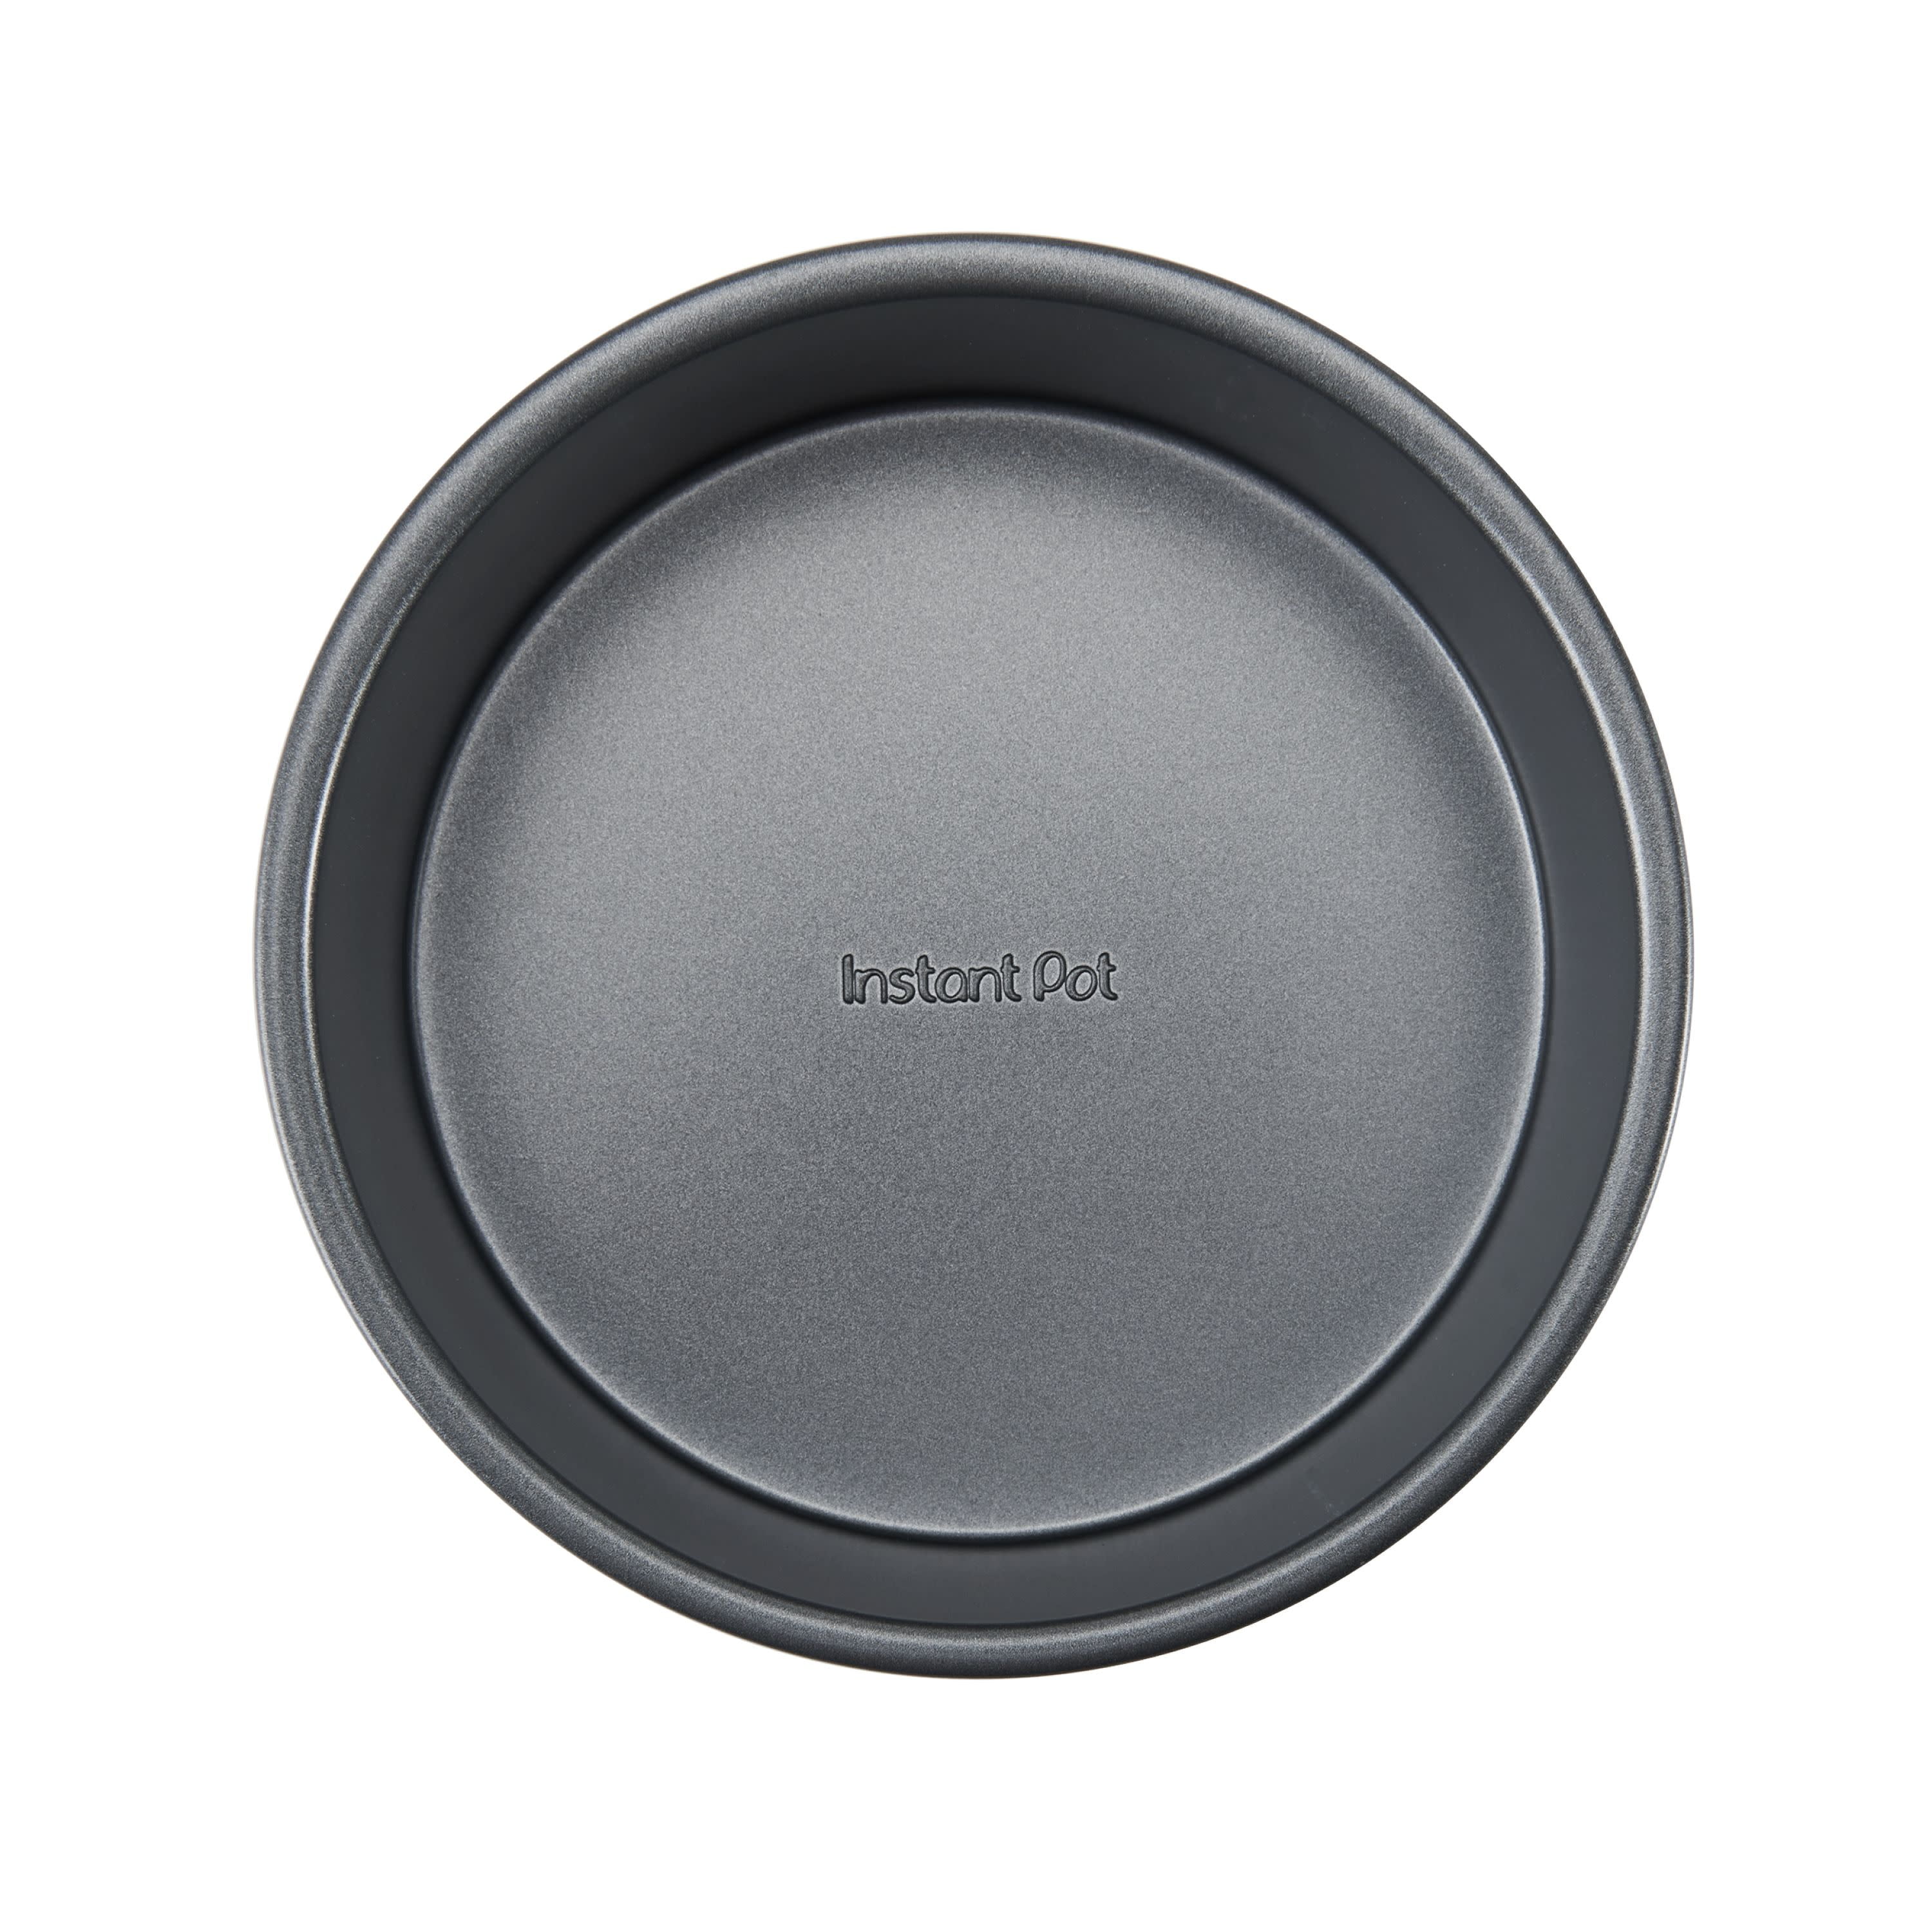 Instant Pot Official Round Cake Pan, 7.7-Inch, Gray